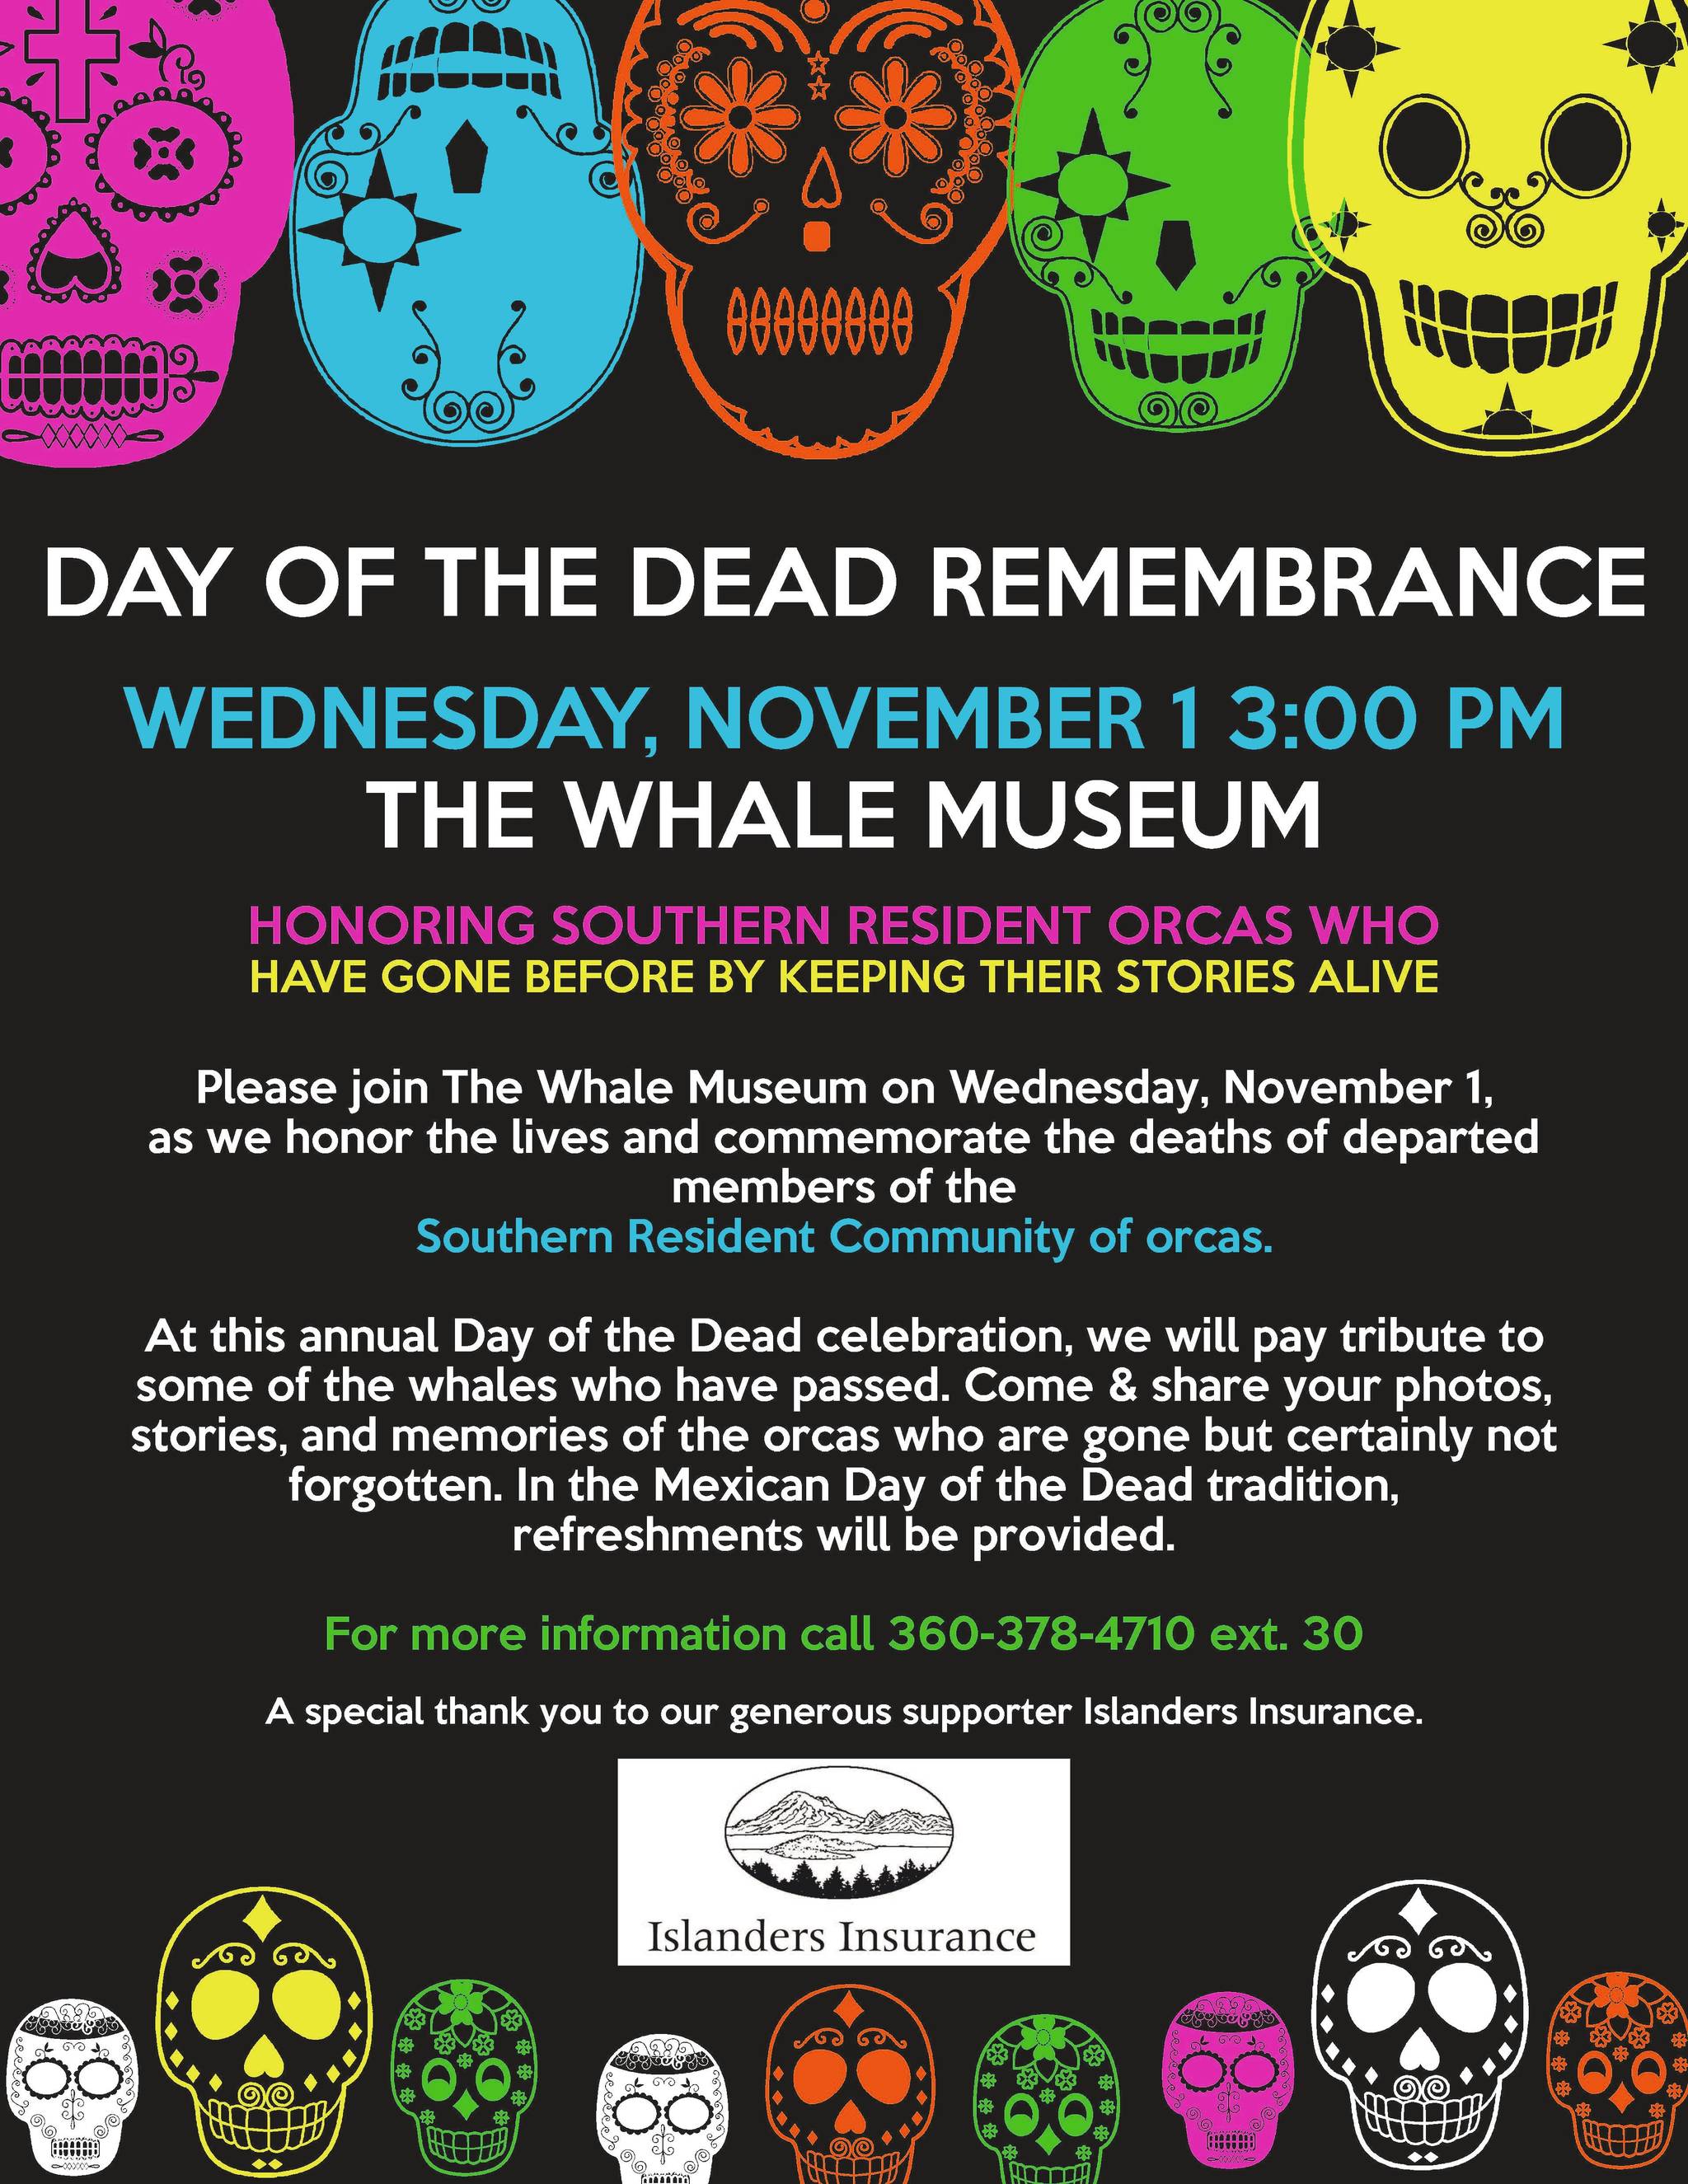 Honor orcas this Day of the Dead